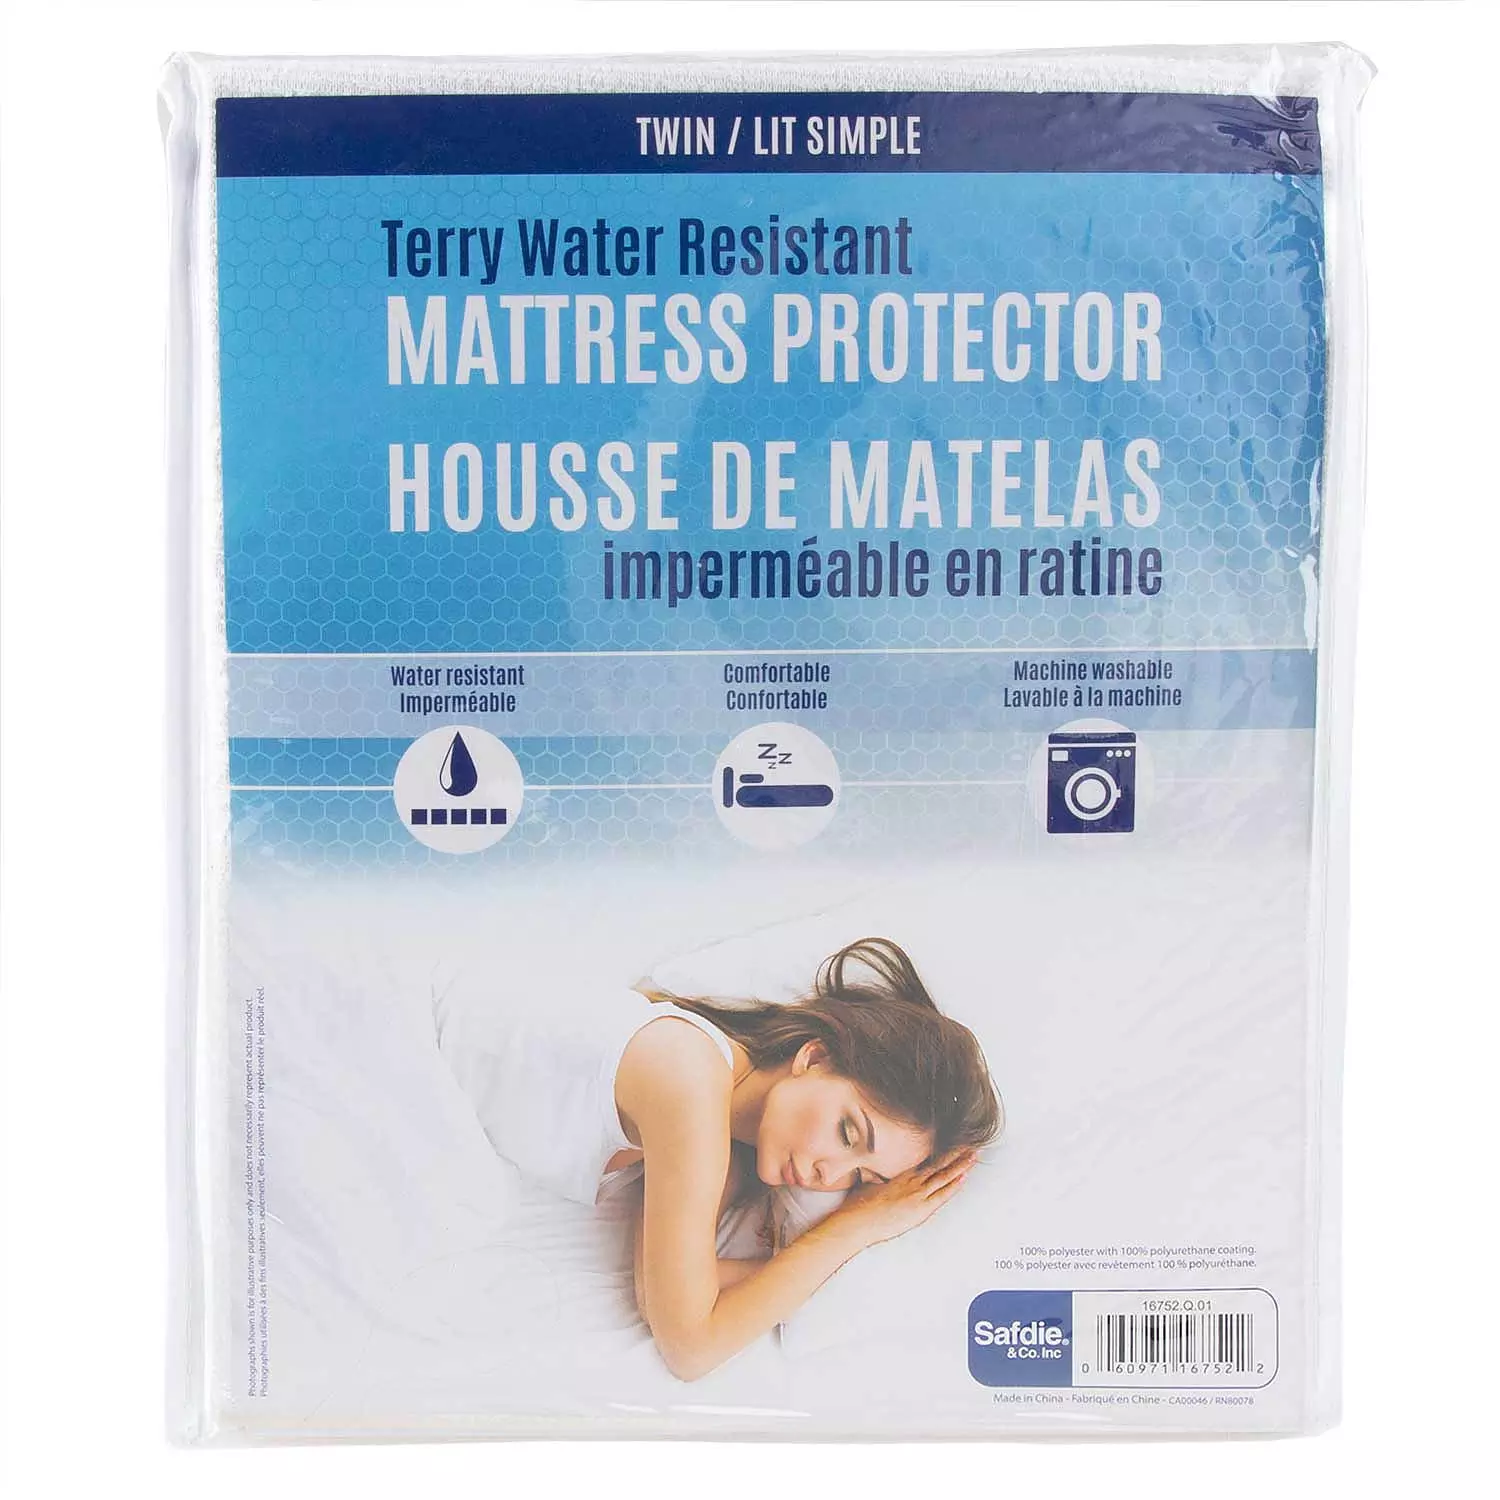 Terry water resistant mattress protector, Twin